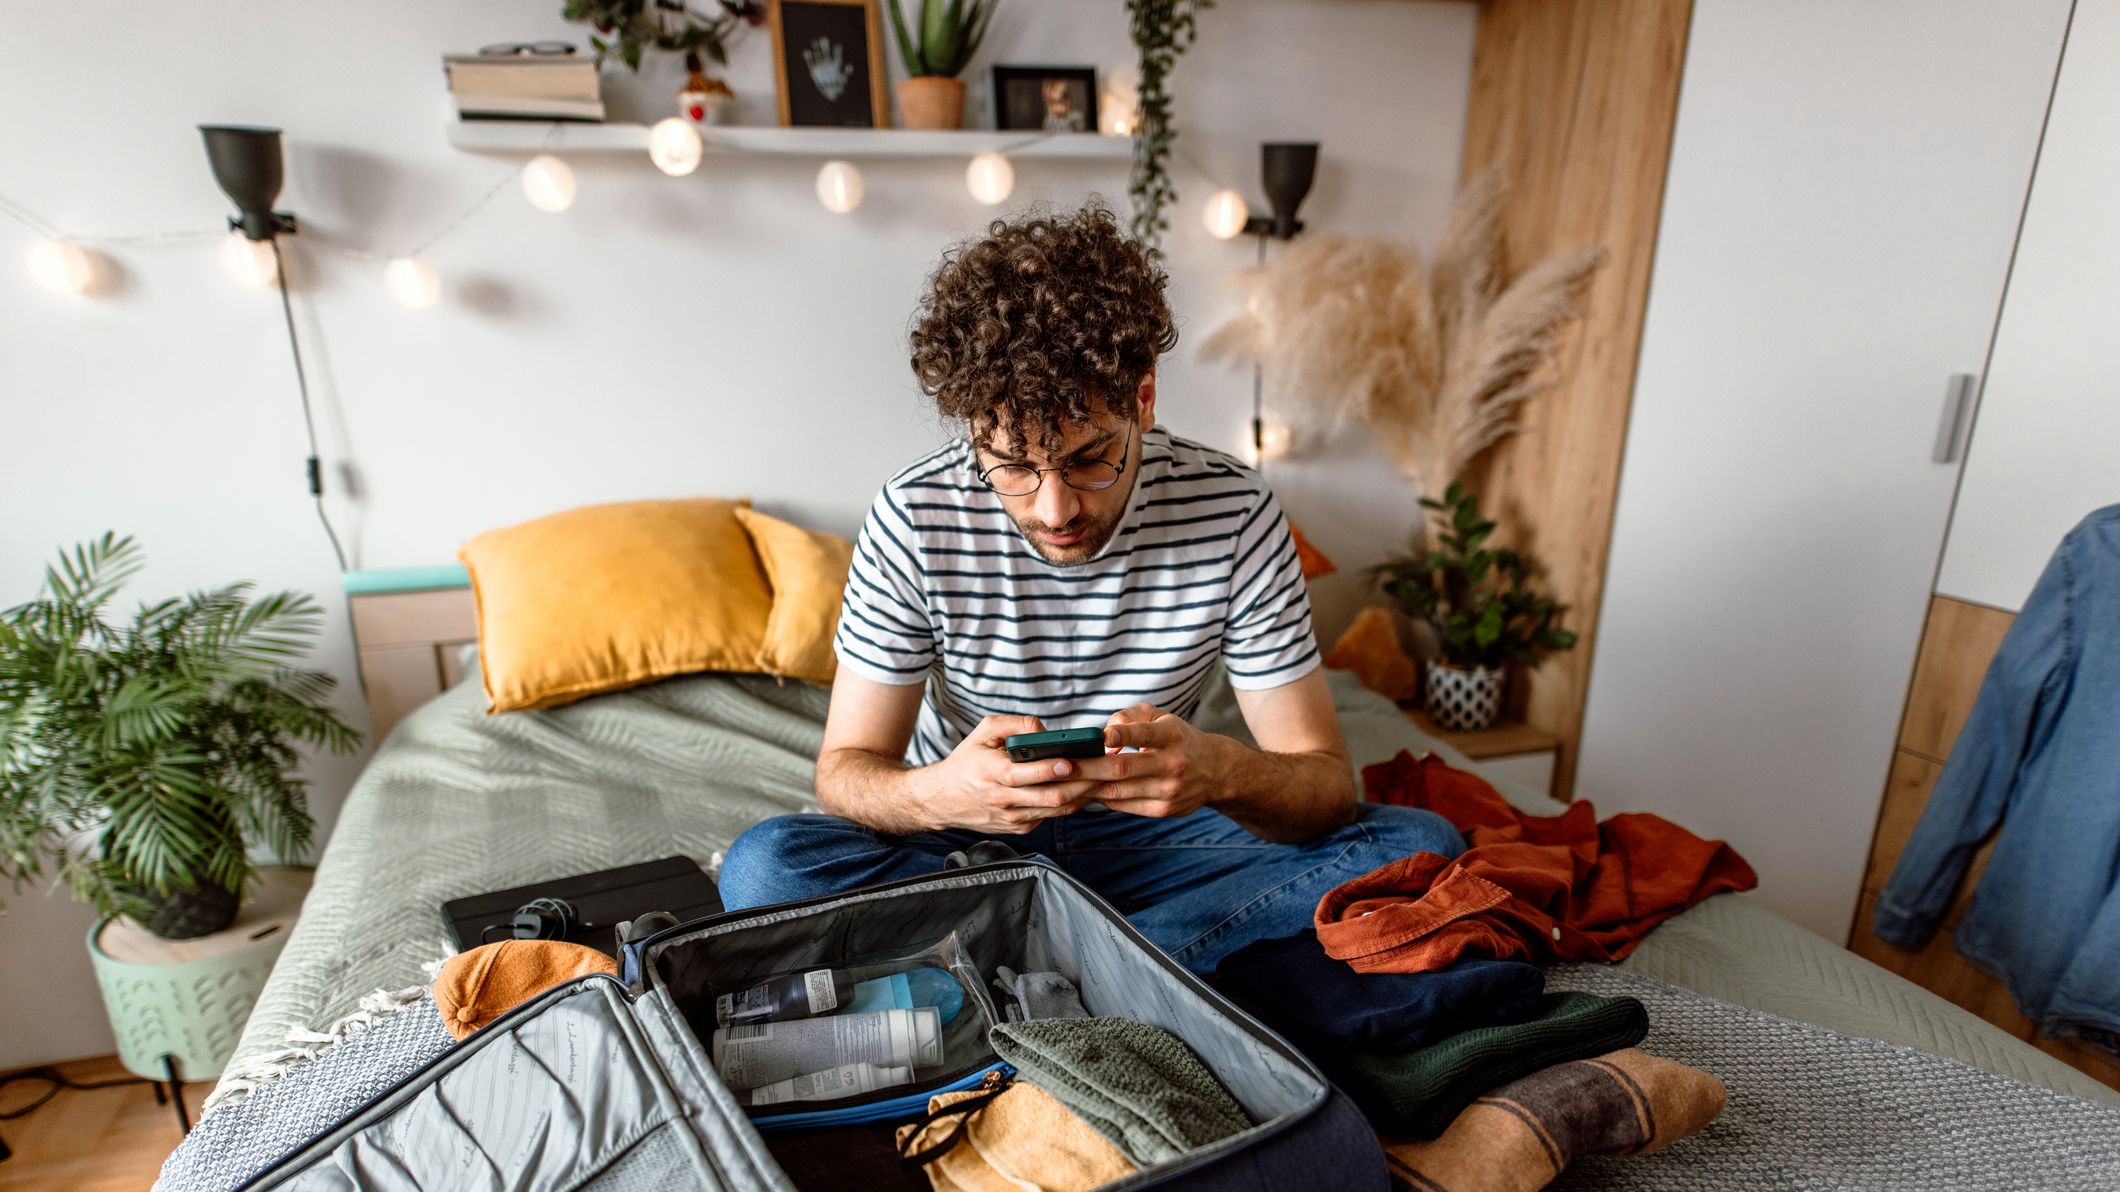 https://hips.hearstapps.com/hmg-prod/images/young-man-sitting-on-his-bed-using-smart-phone-and-royalty-free-image-1699627779.jpg?crop=1xw:0.84335xh;center,top